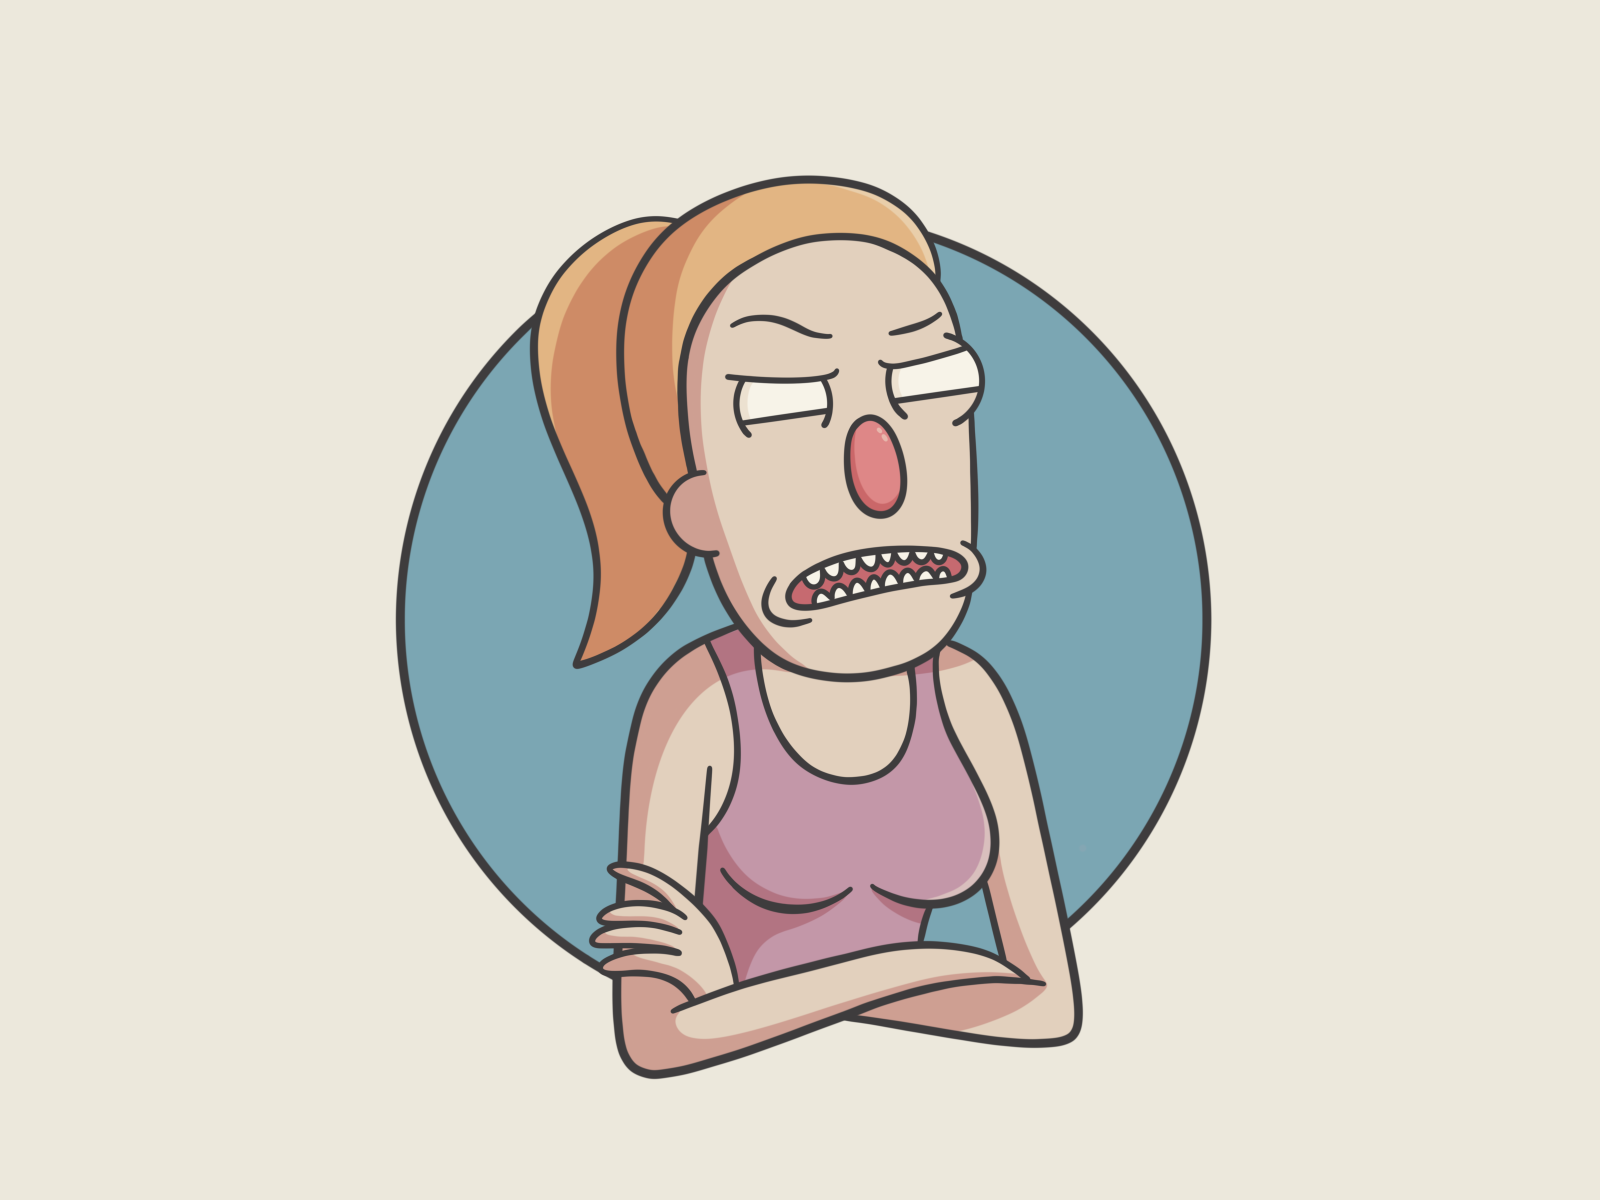 Rick and Morty - Summer Smith adult swim character character design illustration rick and morty summer summer smith